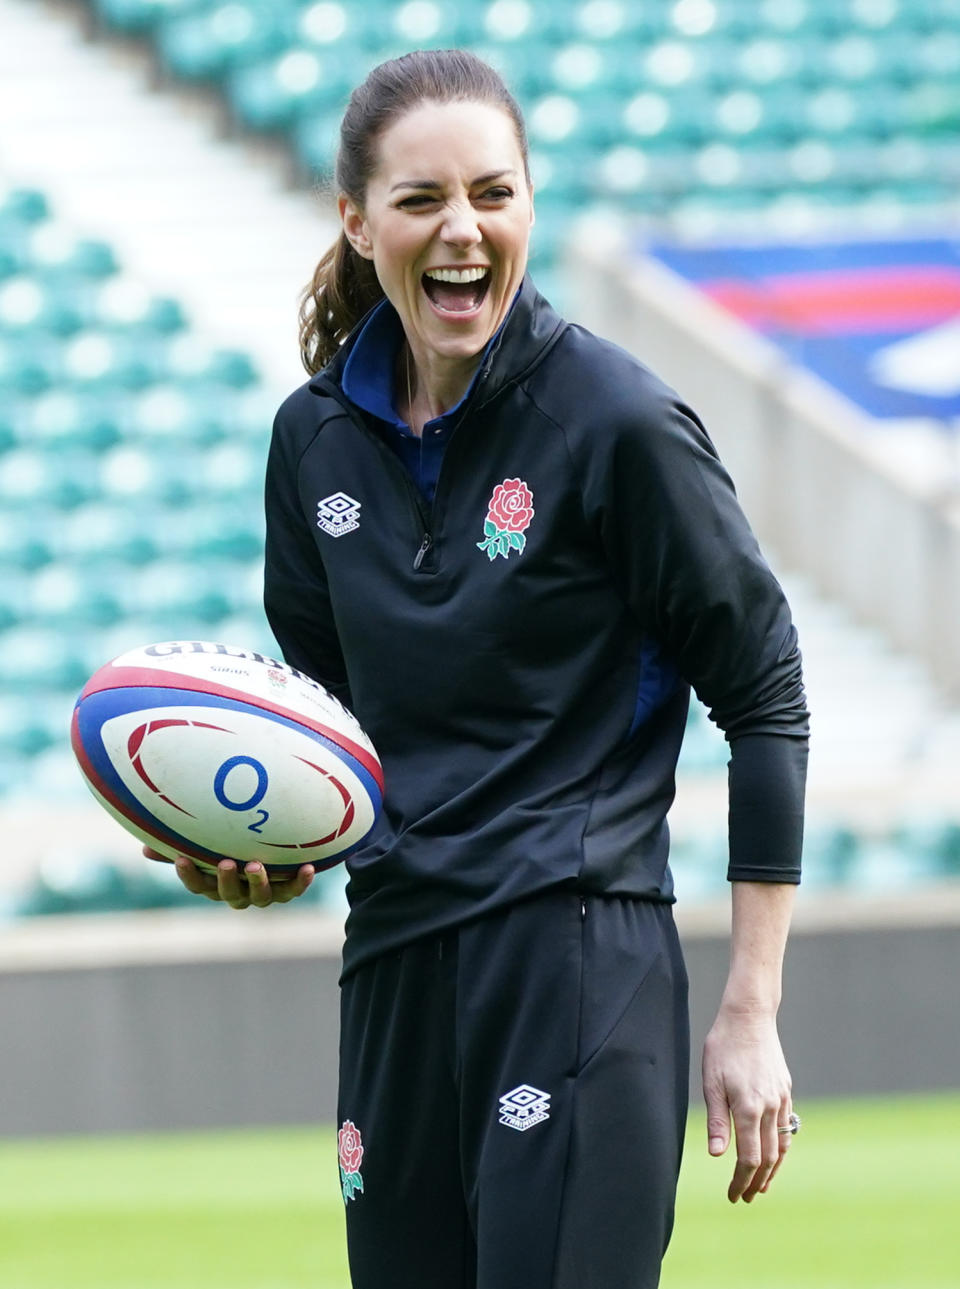 The Duchess of Cambridge, in her new role as Patron of the Rugby Football Union, during a visit to Twickenham Stadium, to meet England players, coaches and referees and join a training session on the pitch. Picture date: Wednesday February 2, 2022.